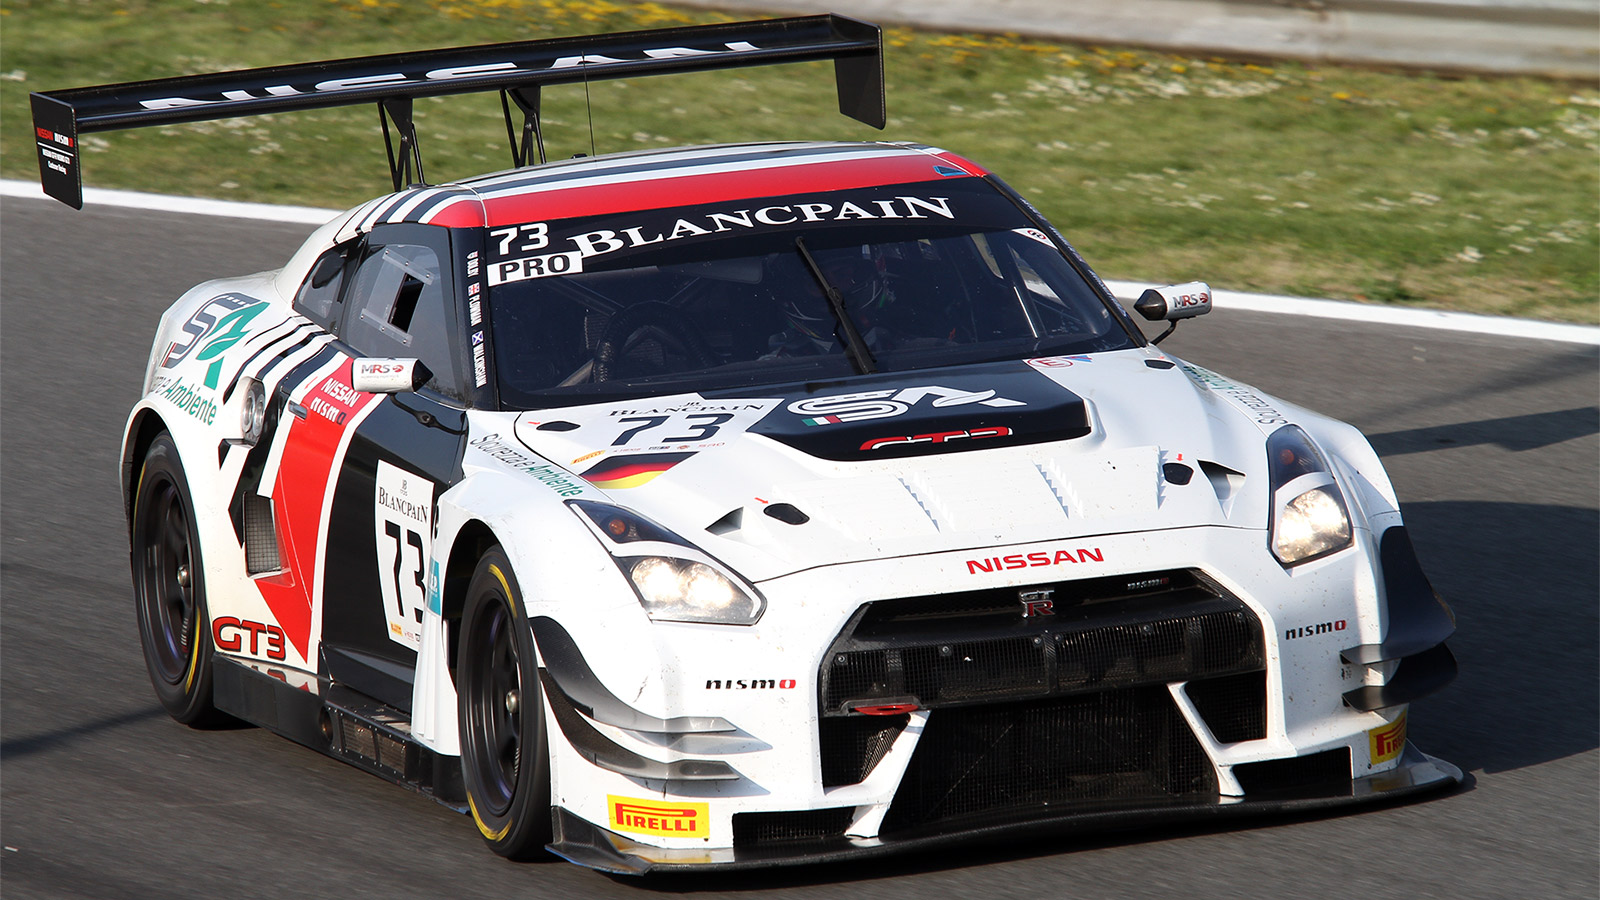 Seventh place Pro Cup finish for Walkinshaw at Monza